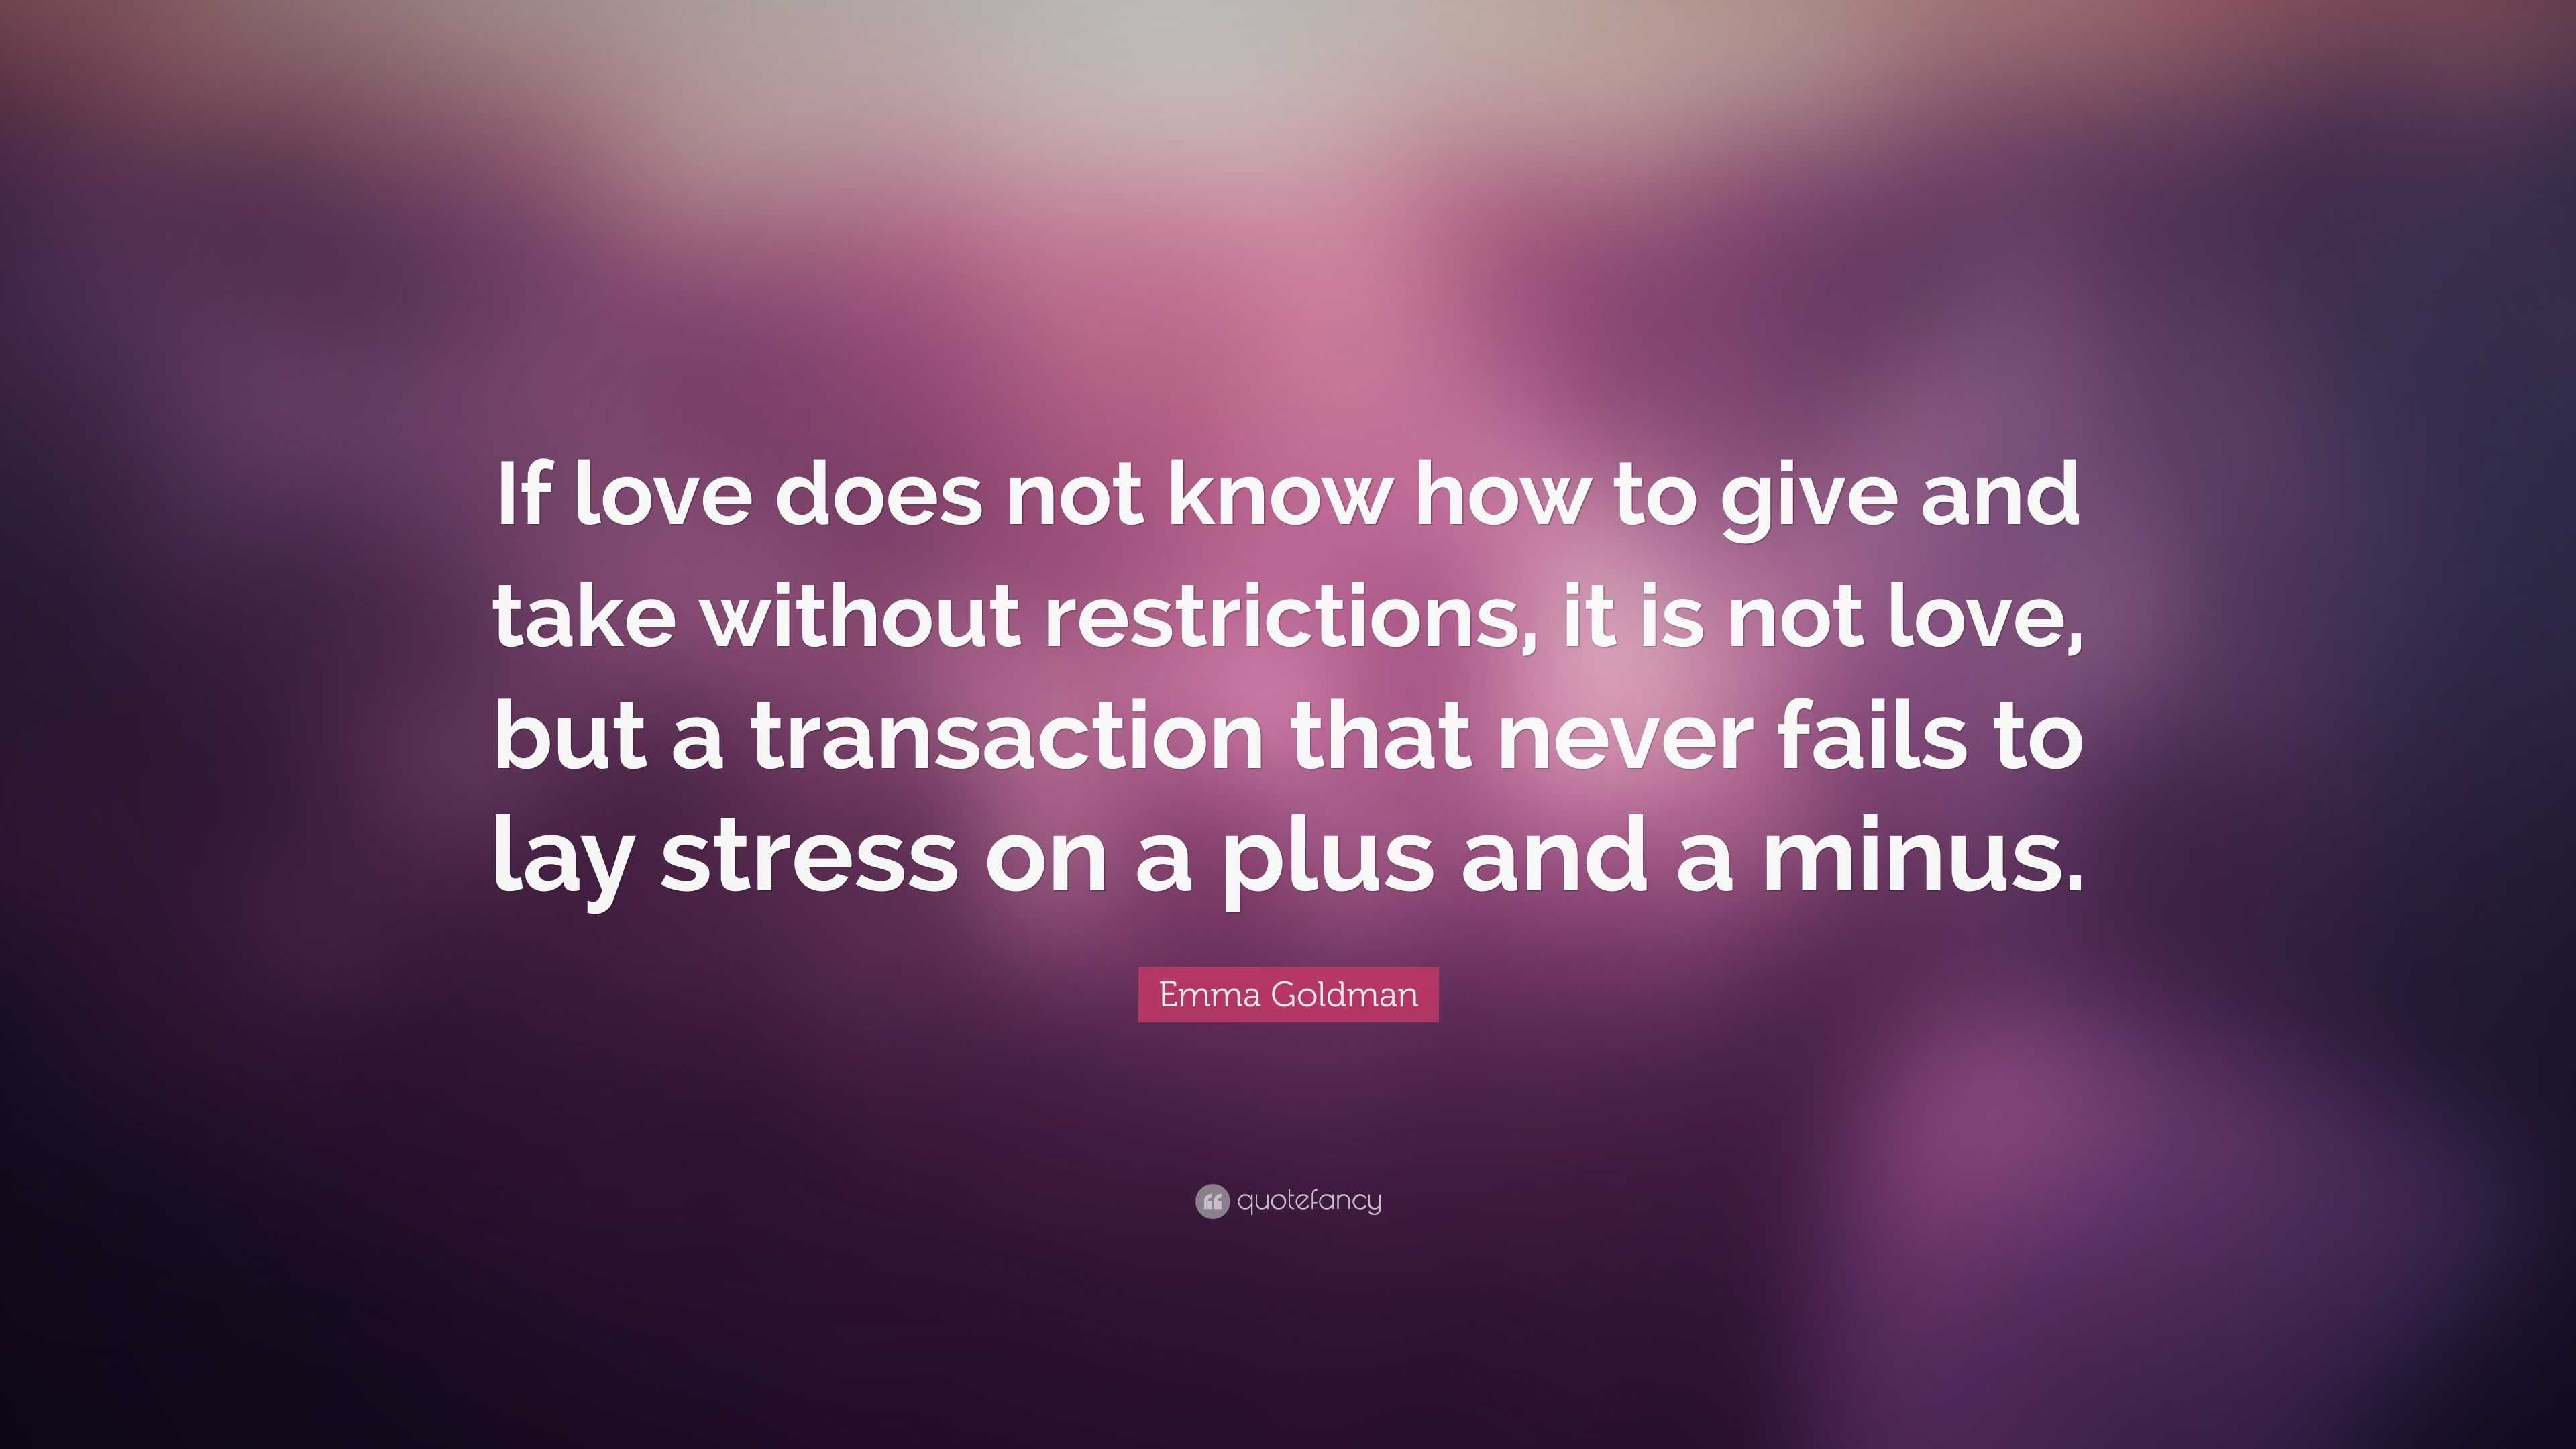 Emma Goldman Quote: “If love does not know how to give and take without  restrictions, it is not love, but a transaction that never fails to l...”